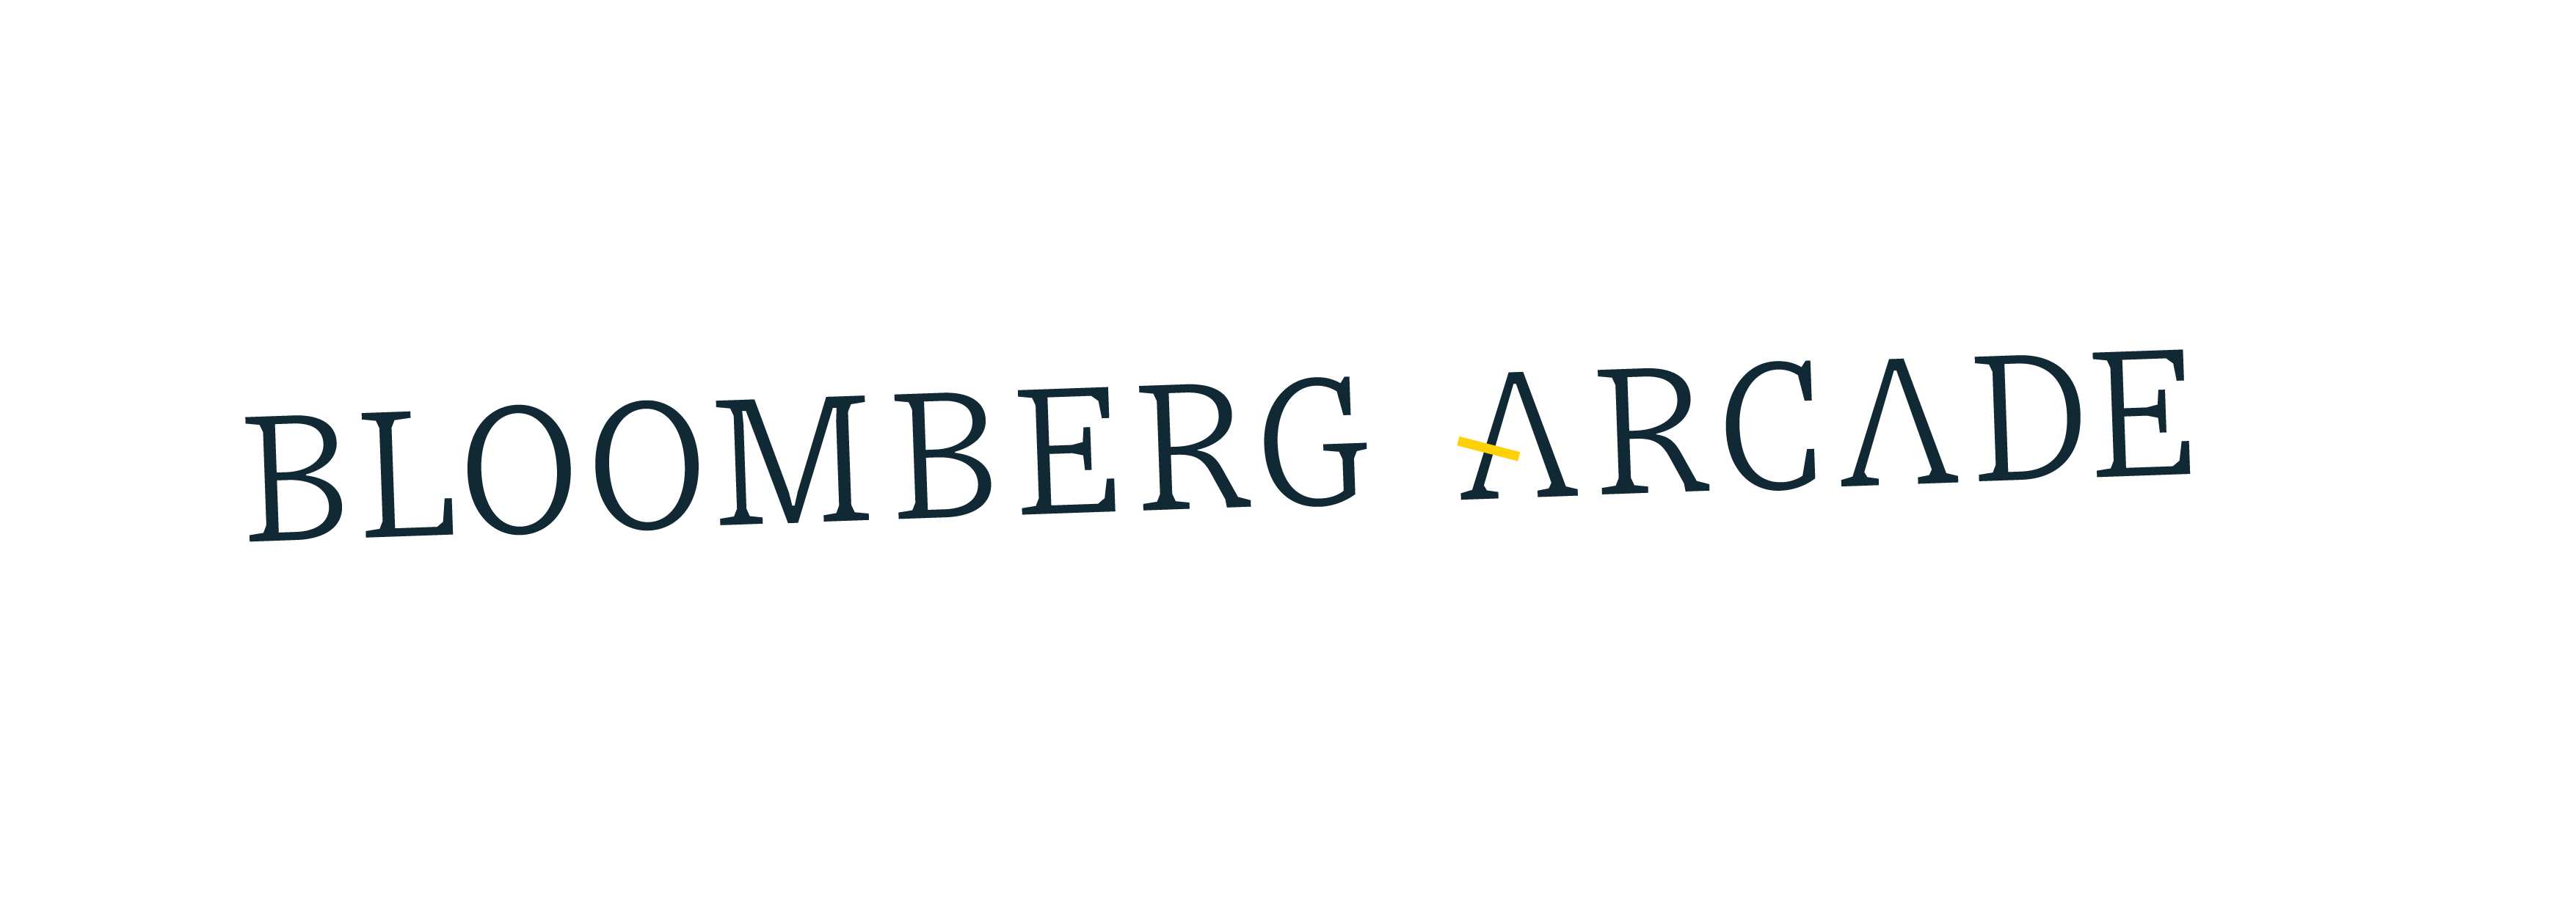 the logo for Bloomberg Arcade